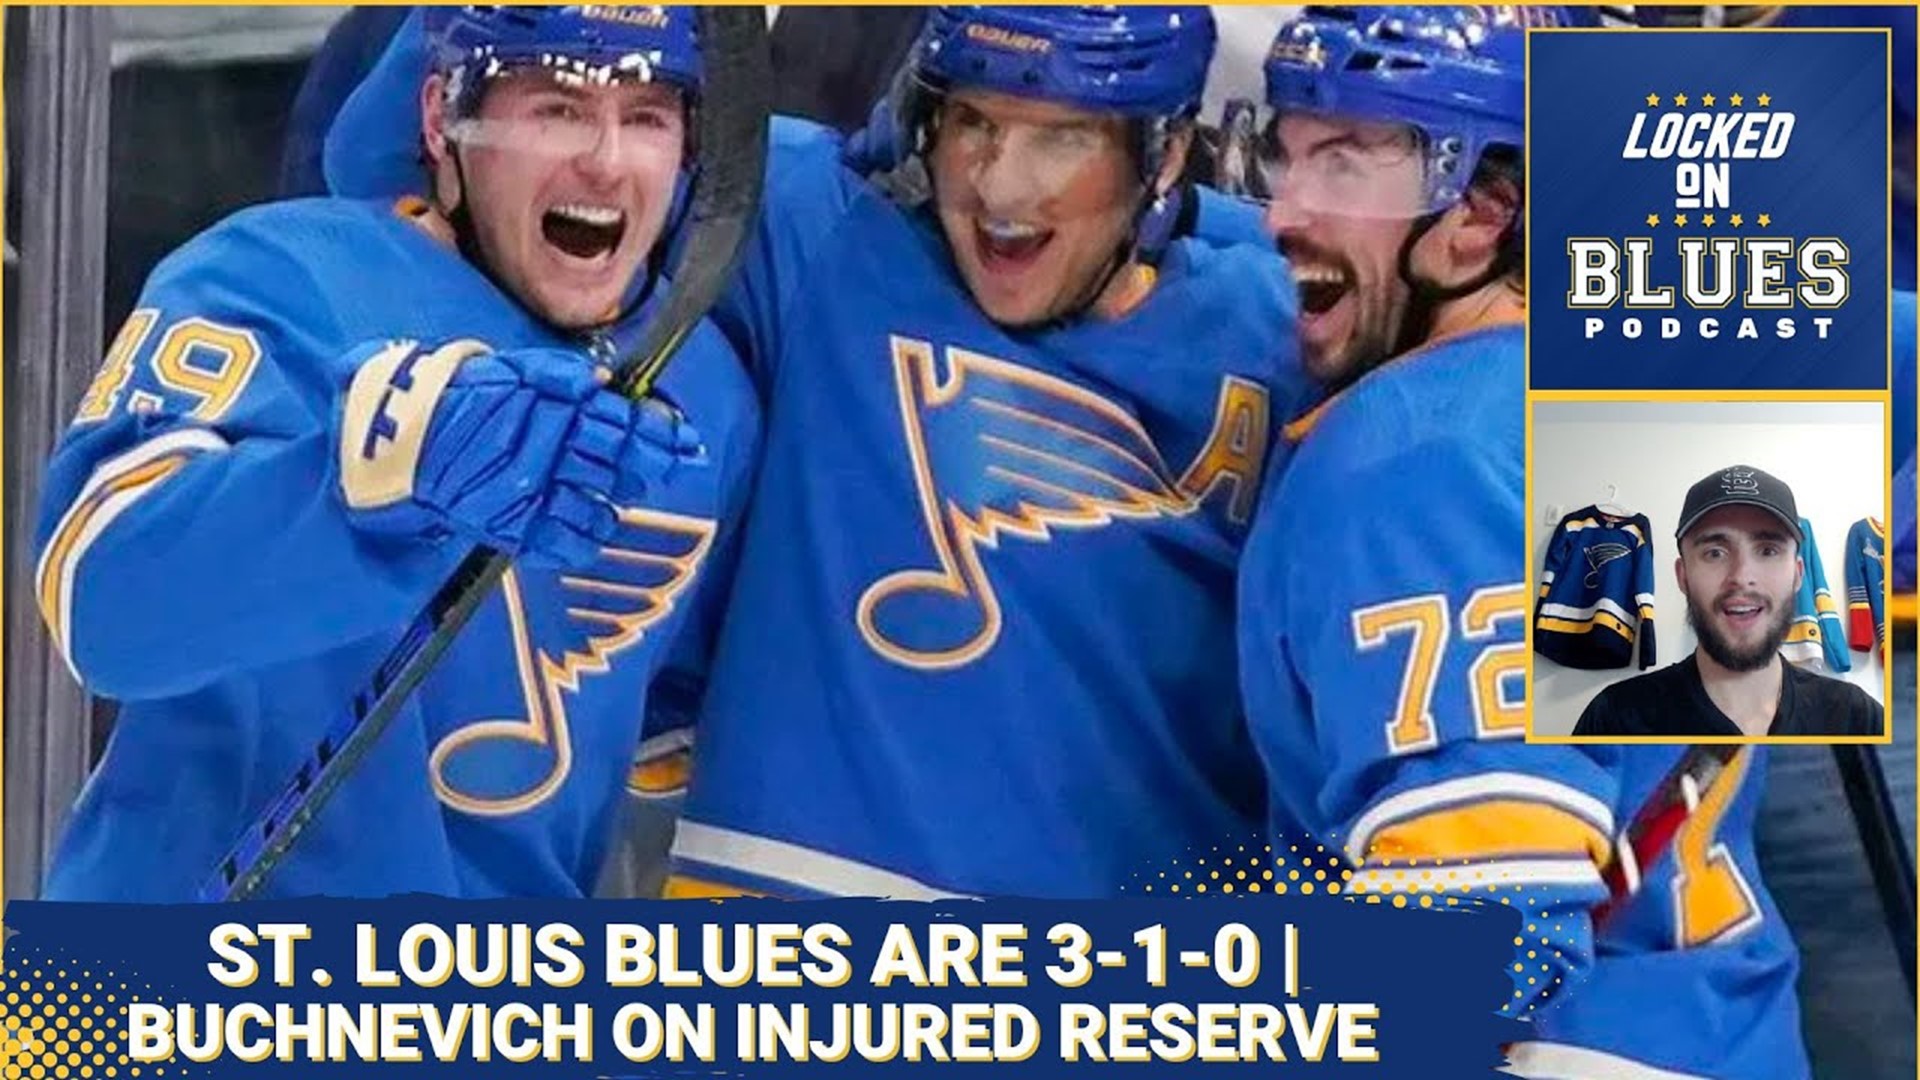 Josh Hyman covers the St. Louis Blues third and fouth games of the season. He also goes over the injuries to Saad and Buchnevich, and the signing of Pitlick.